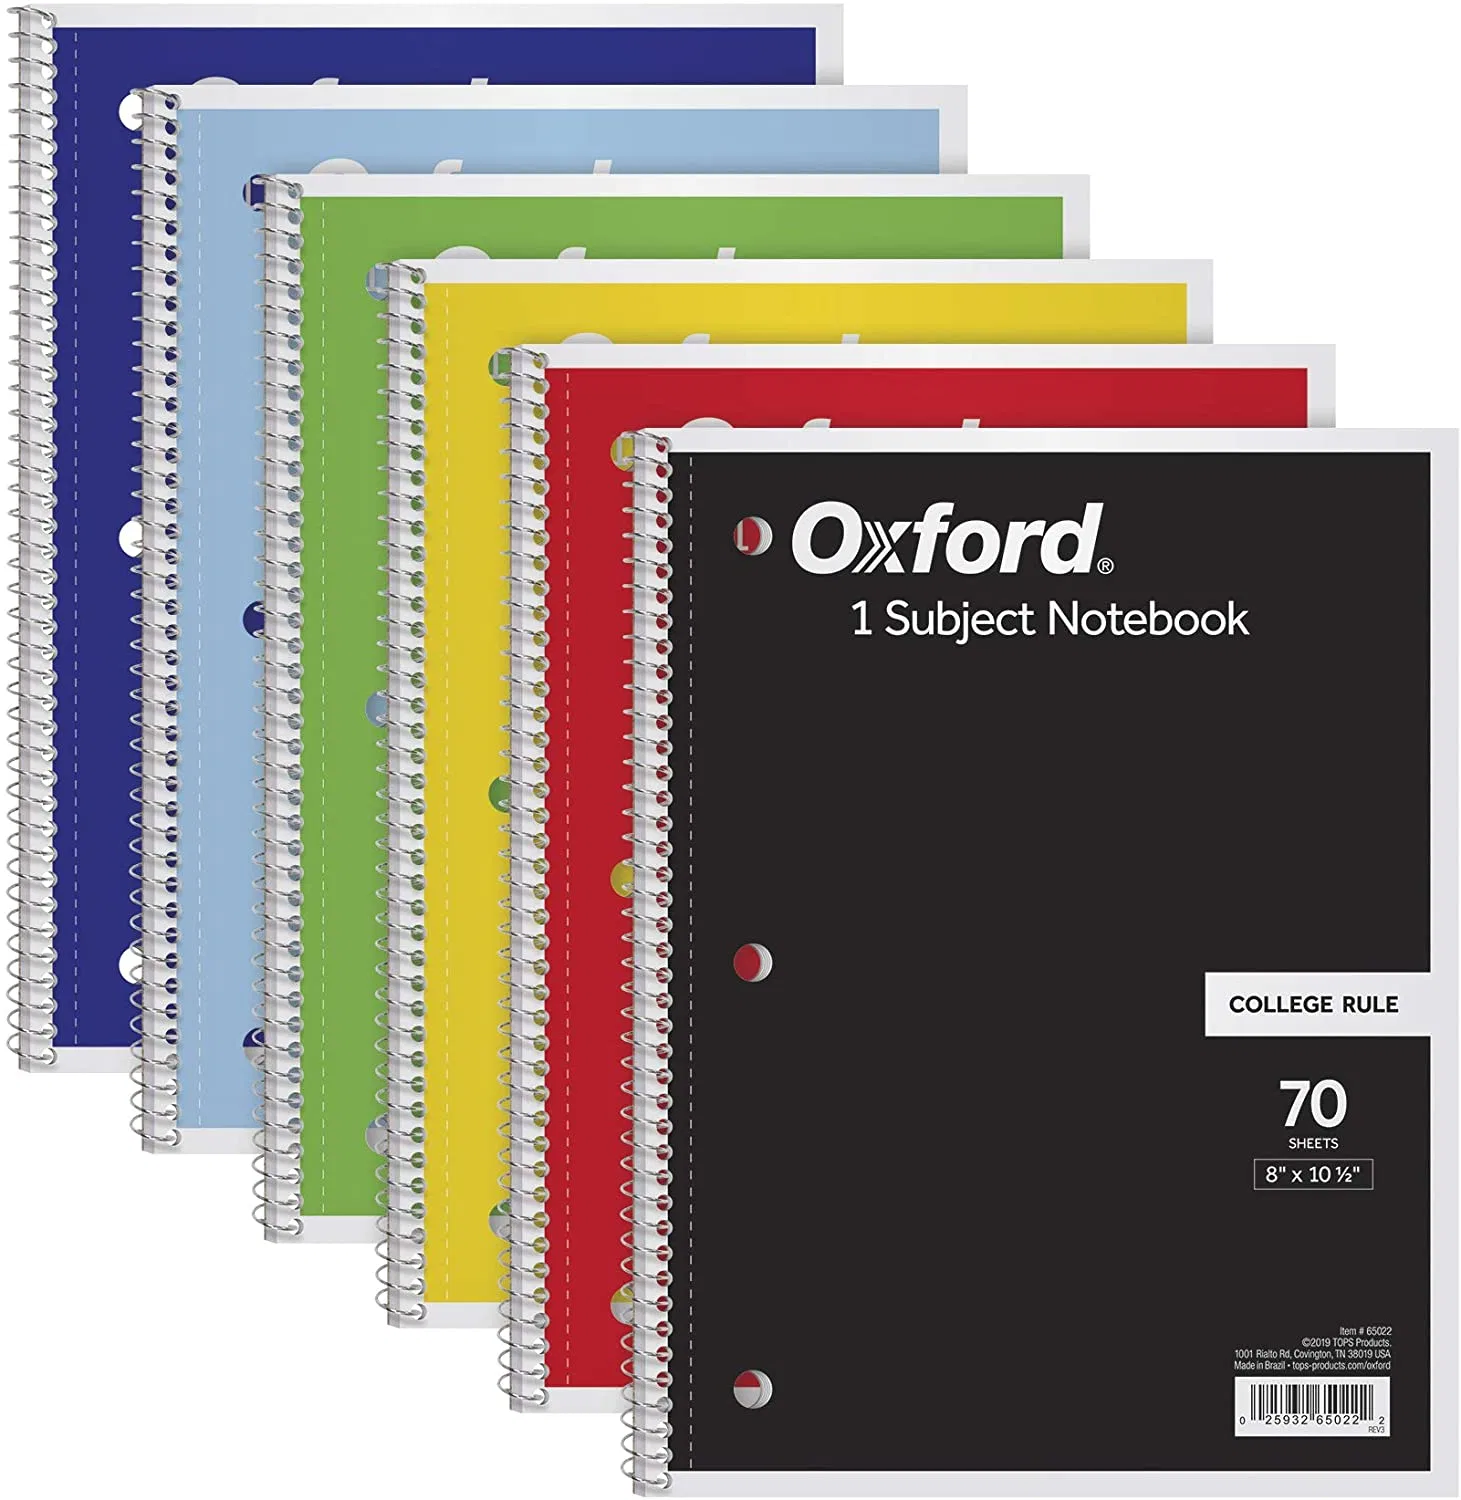 A4 Oxford Spiral Bound Journals Notebook Wholesale 6 Pack, 1 Subject, College Ruled Paper, Color Assortment May Vary